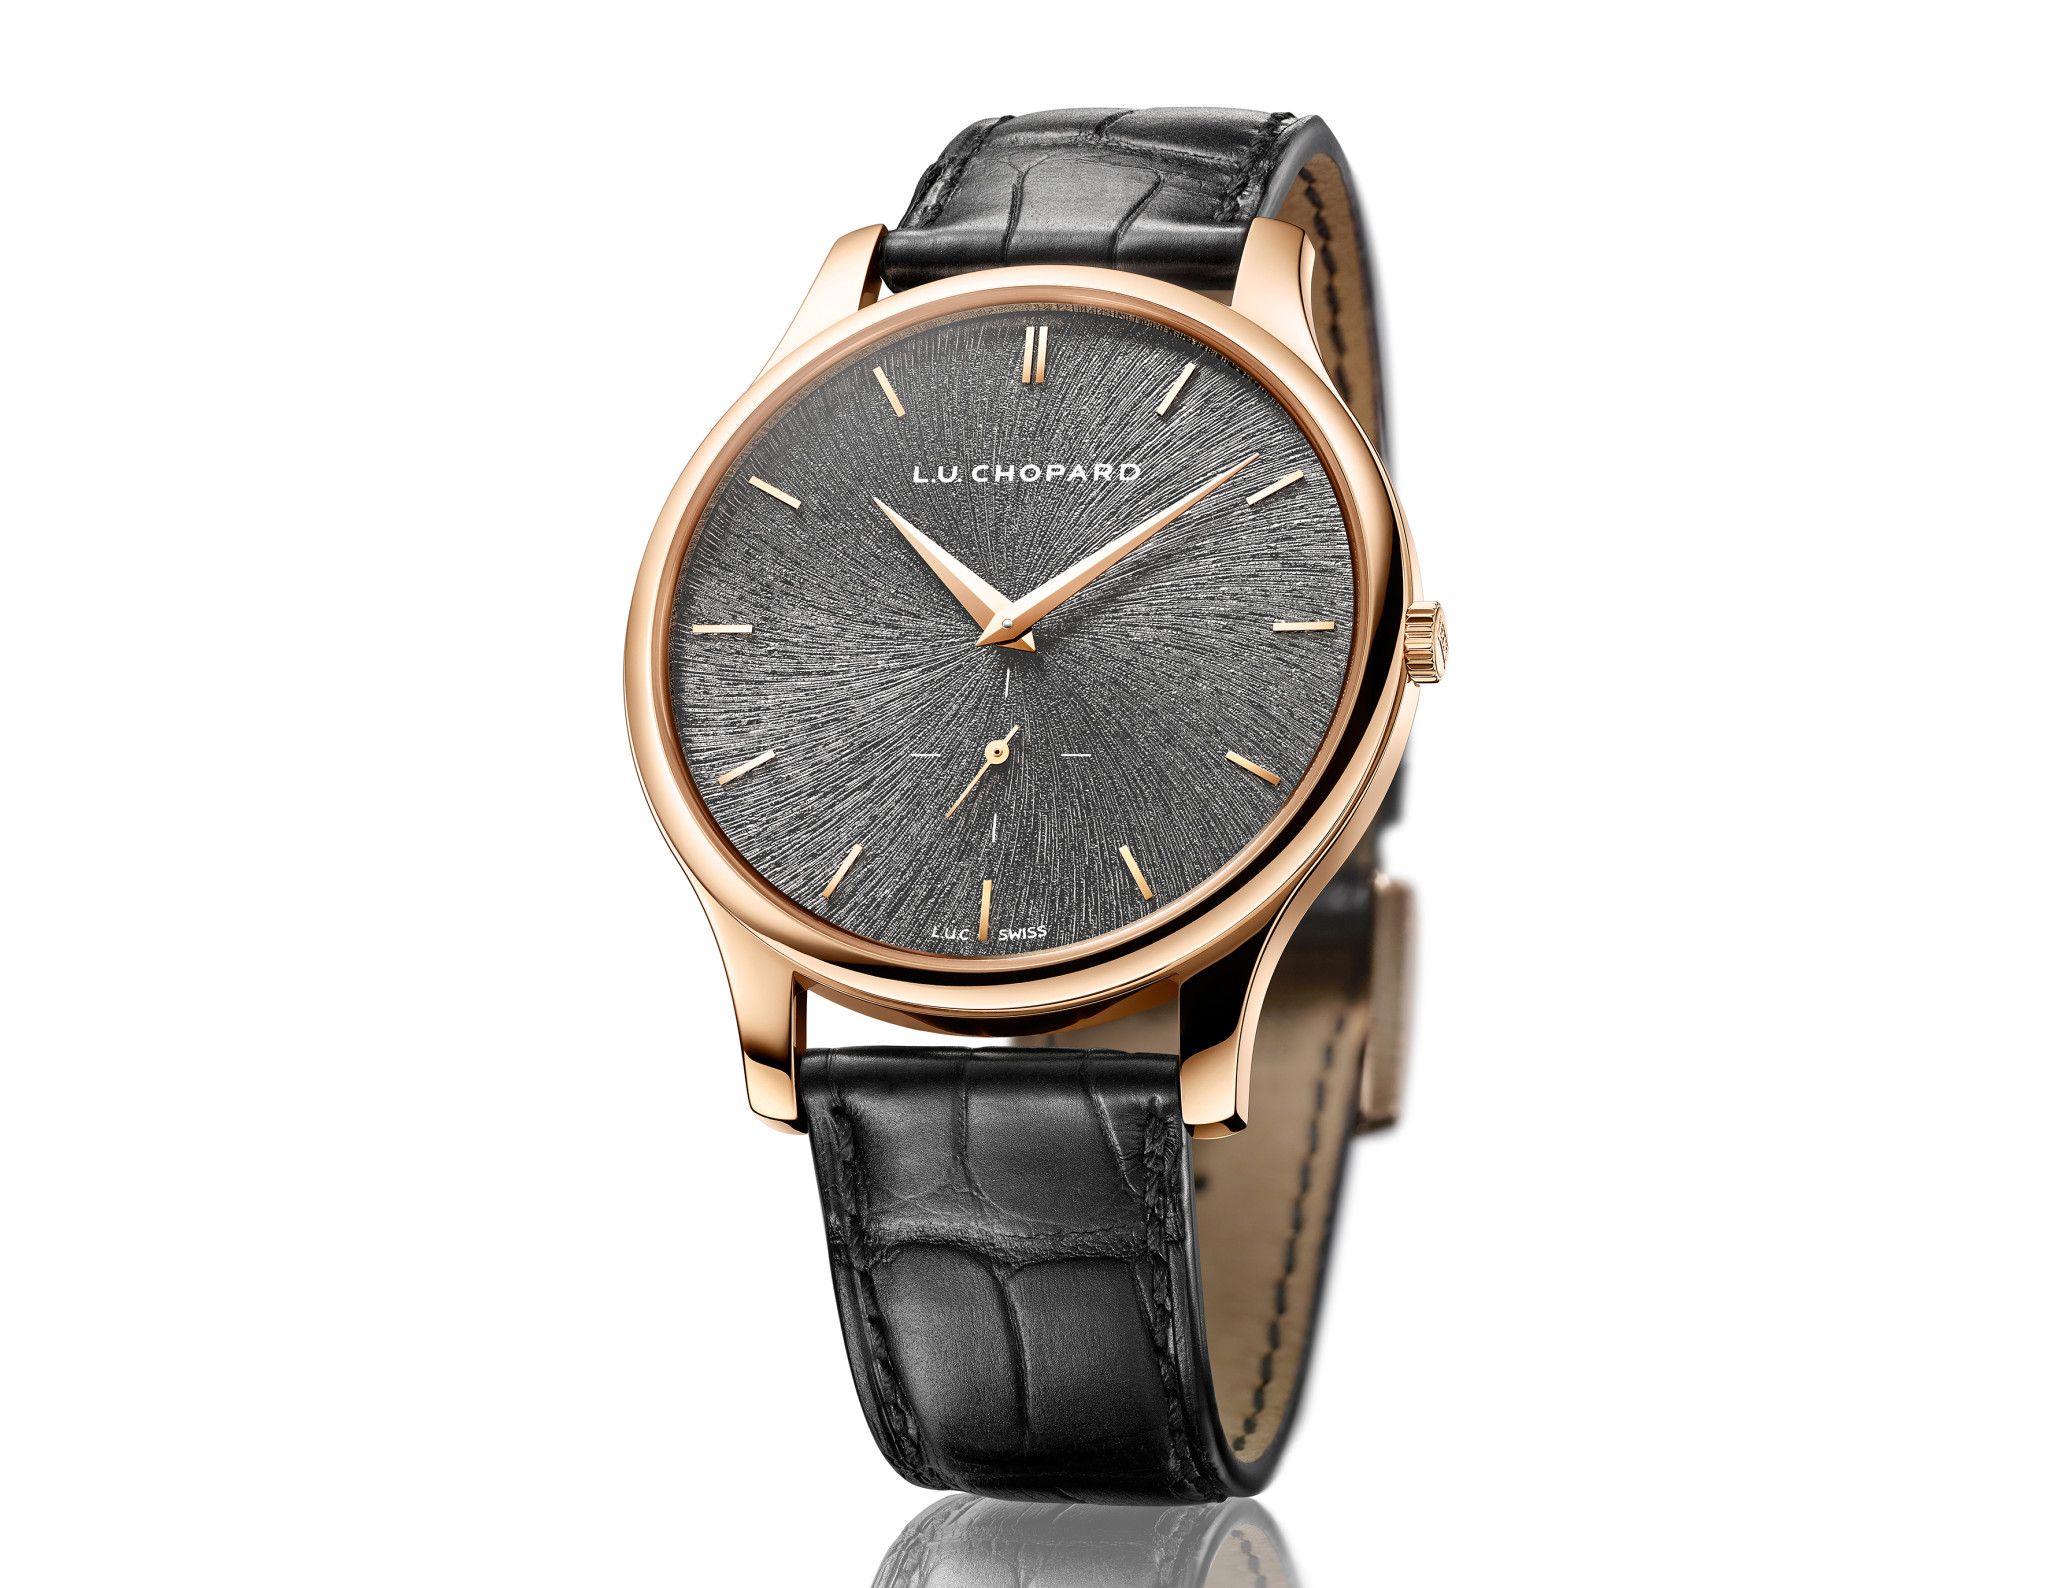 Chopard COULD BE GREAT! Hear me out. Chopard LUC XPS 